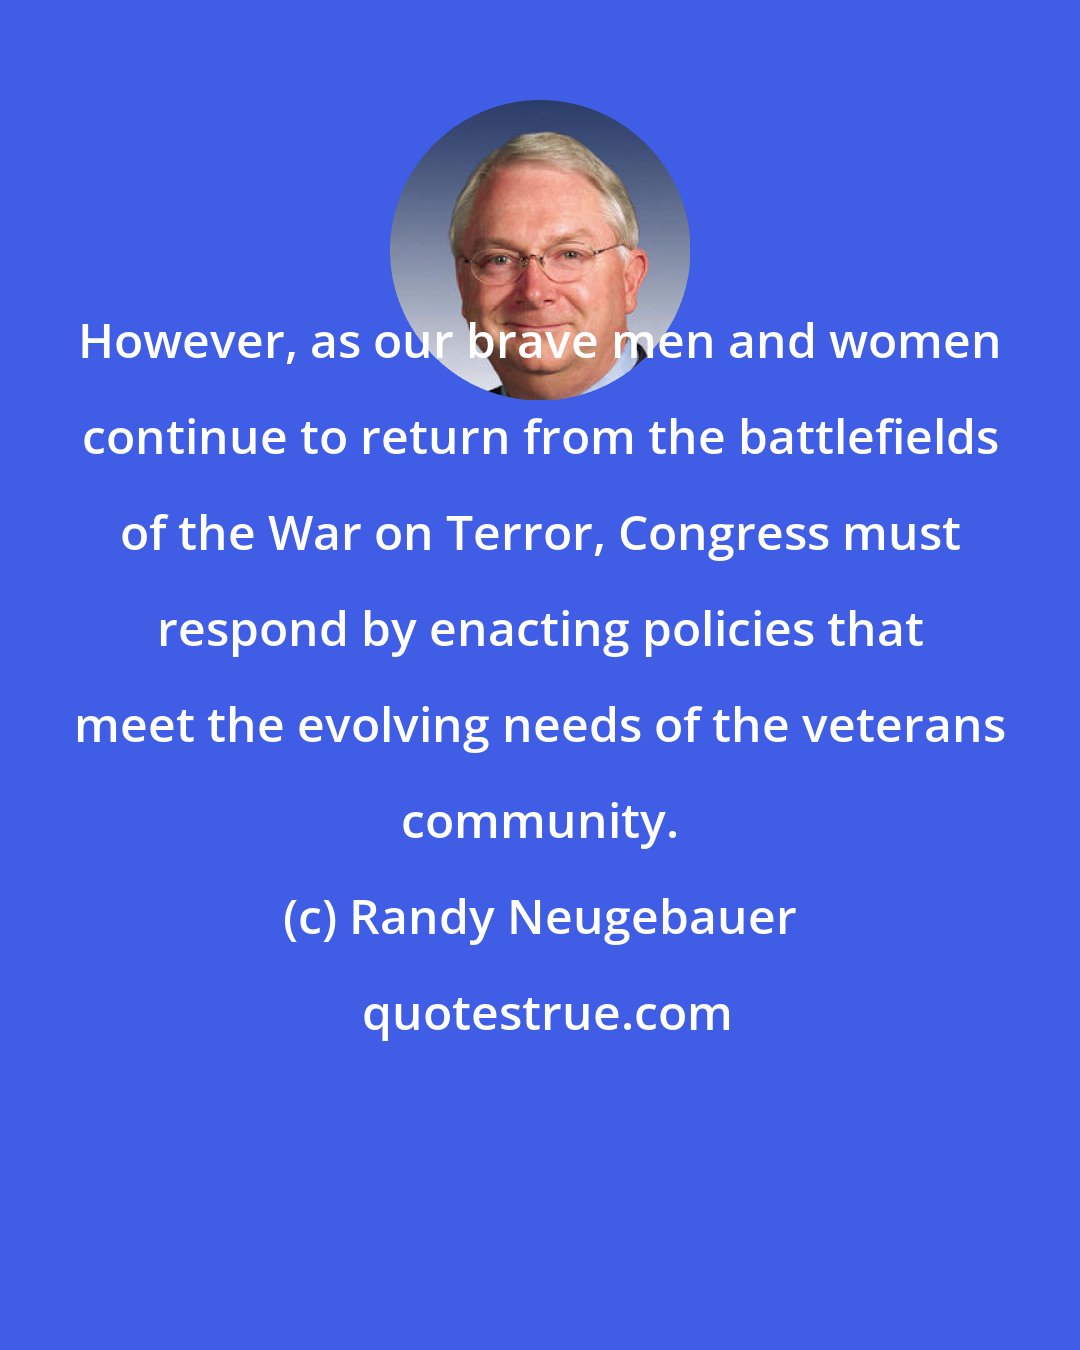 Randy Neugebauer: However, as our brave men and women continue to return from the battlefields of the War on Terror, Congress must respond by enacting policies that meet the evolving needs of the veterans community.